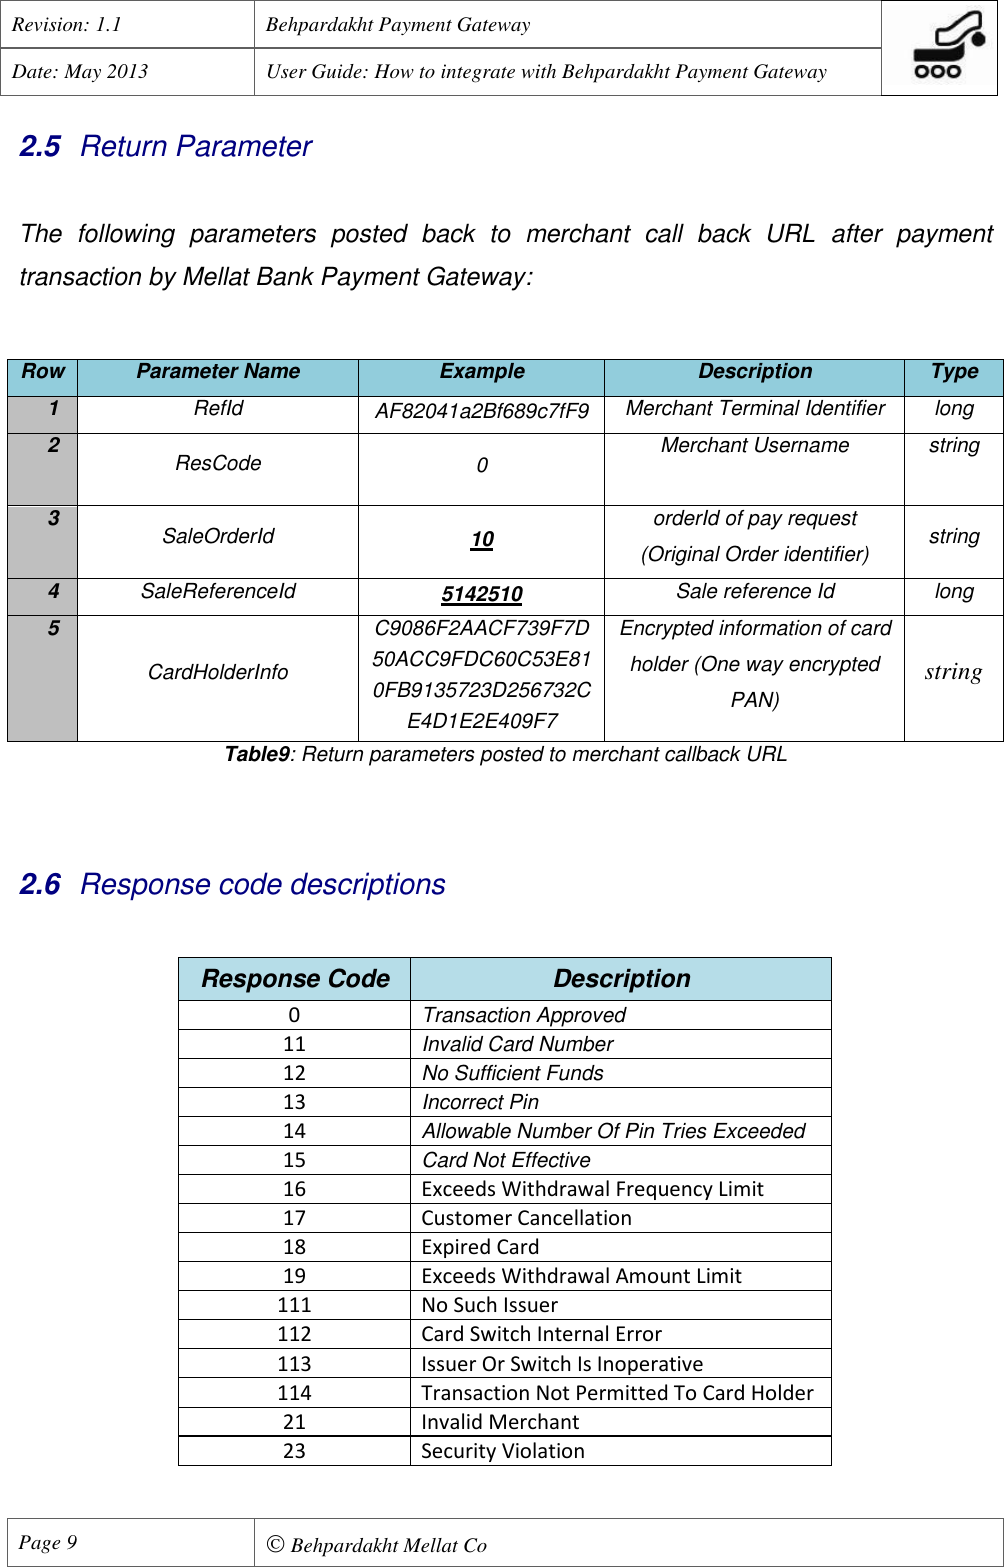 Page 10 of 11 - Behpardakht Mellat - Payment Gateway PGW User Manual English Ver 1.1